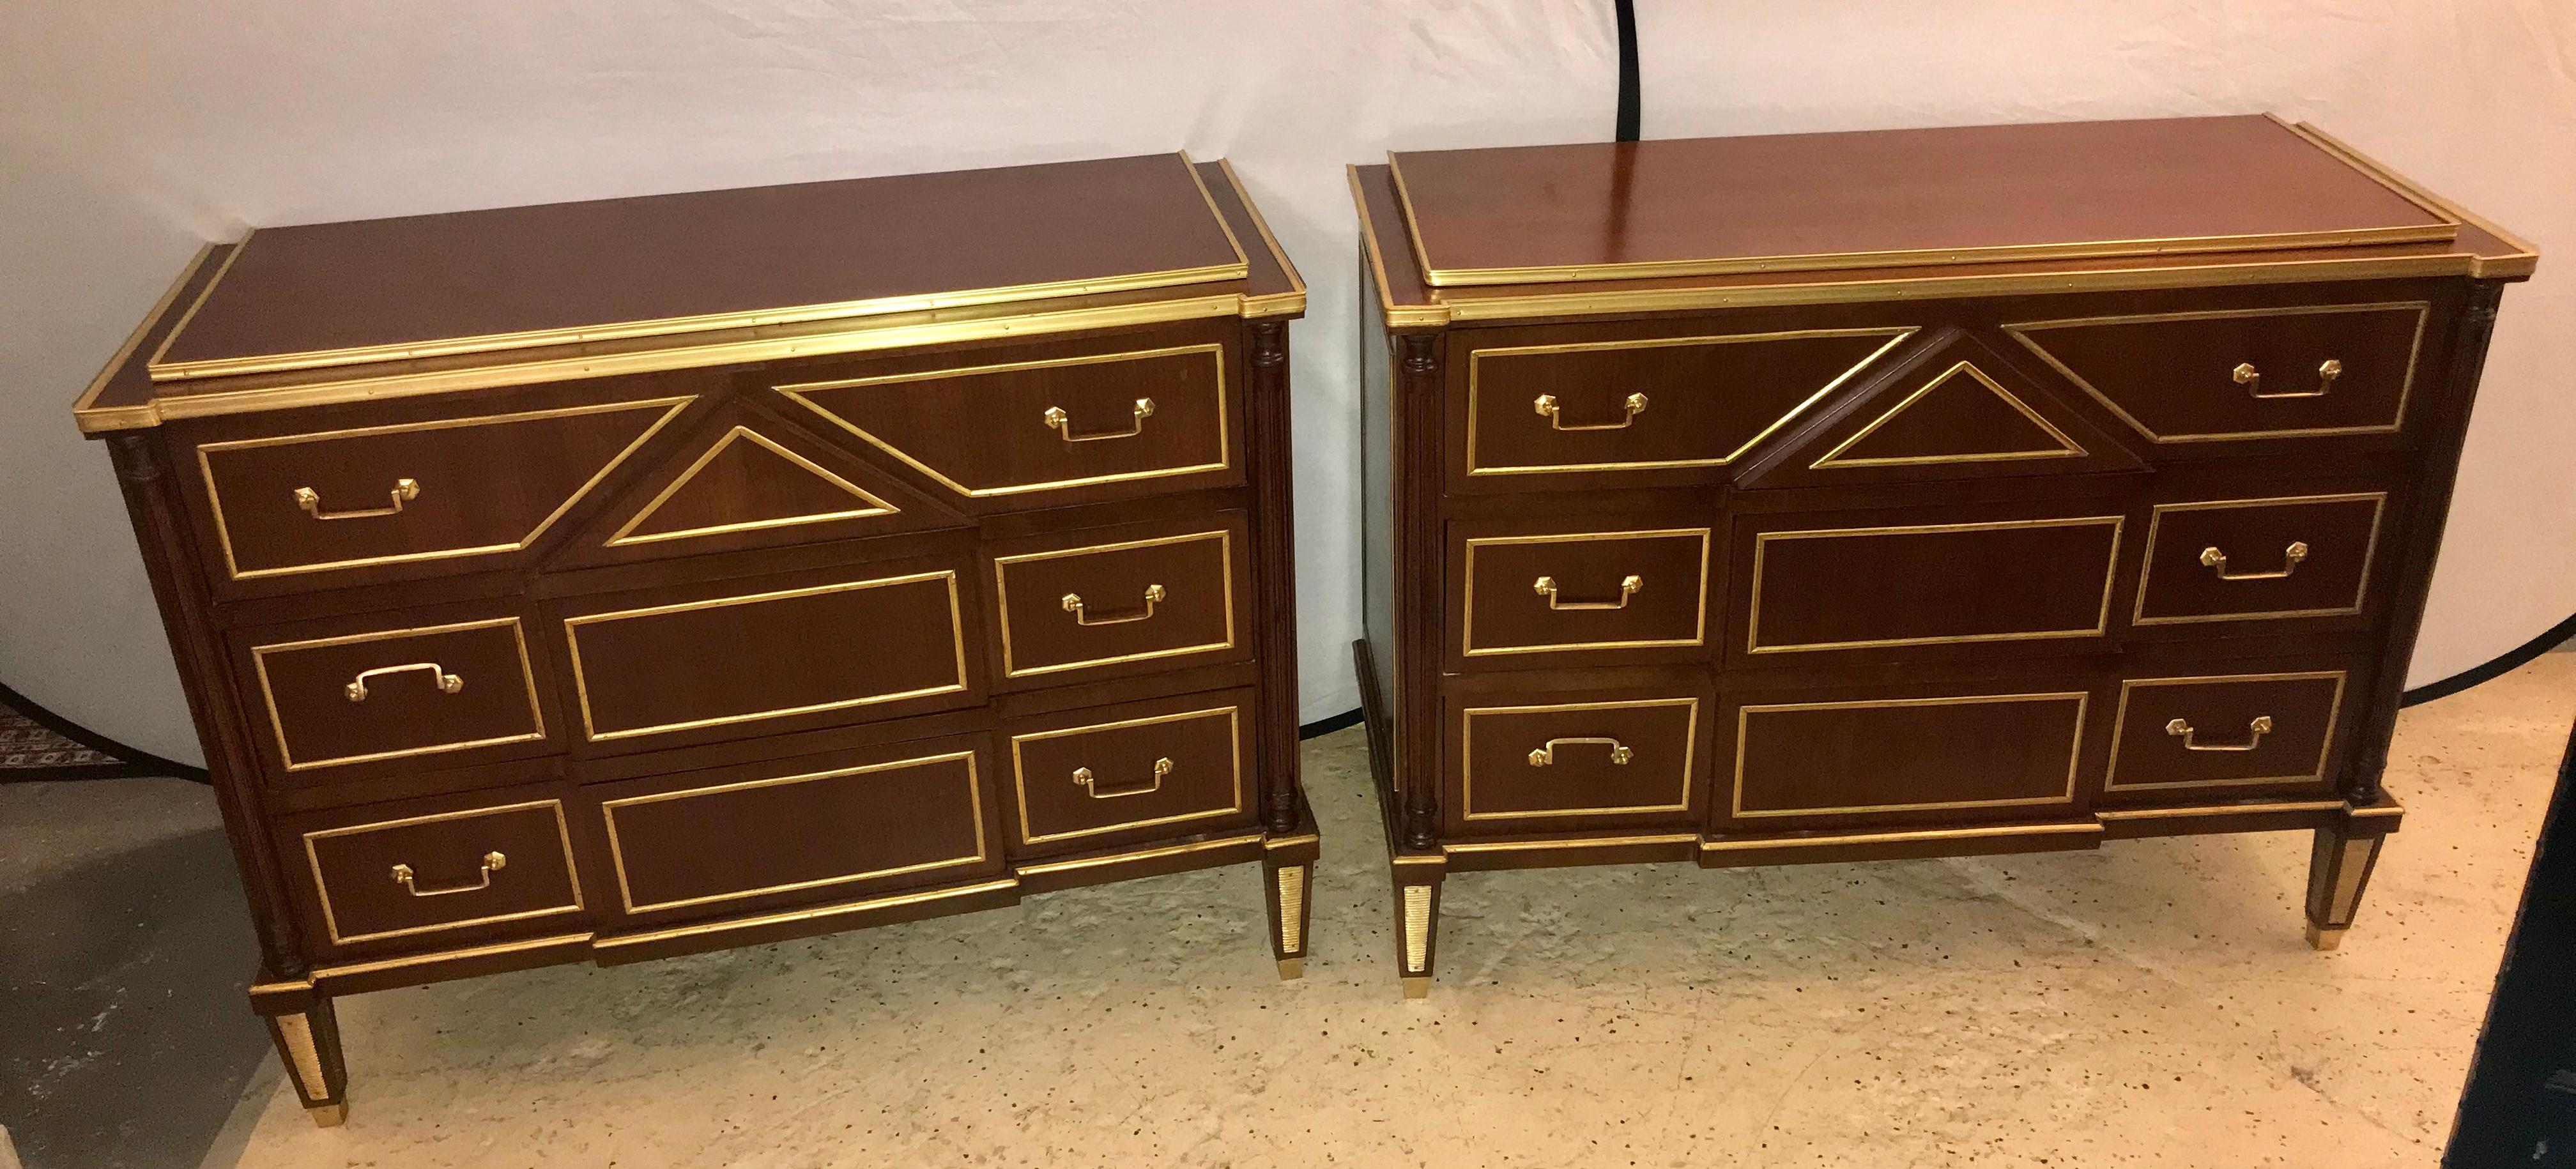 Pair of Russian Neoclassical Style Commodes / Bedside Nightstands or Servers (Hollywood Regency)